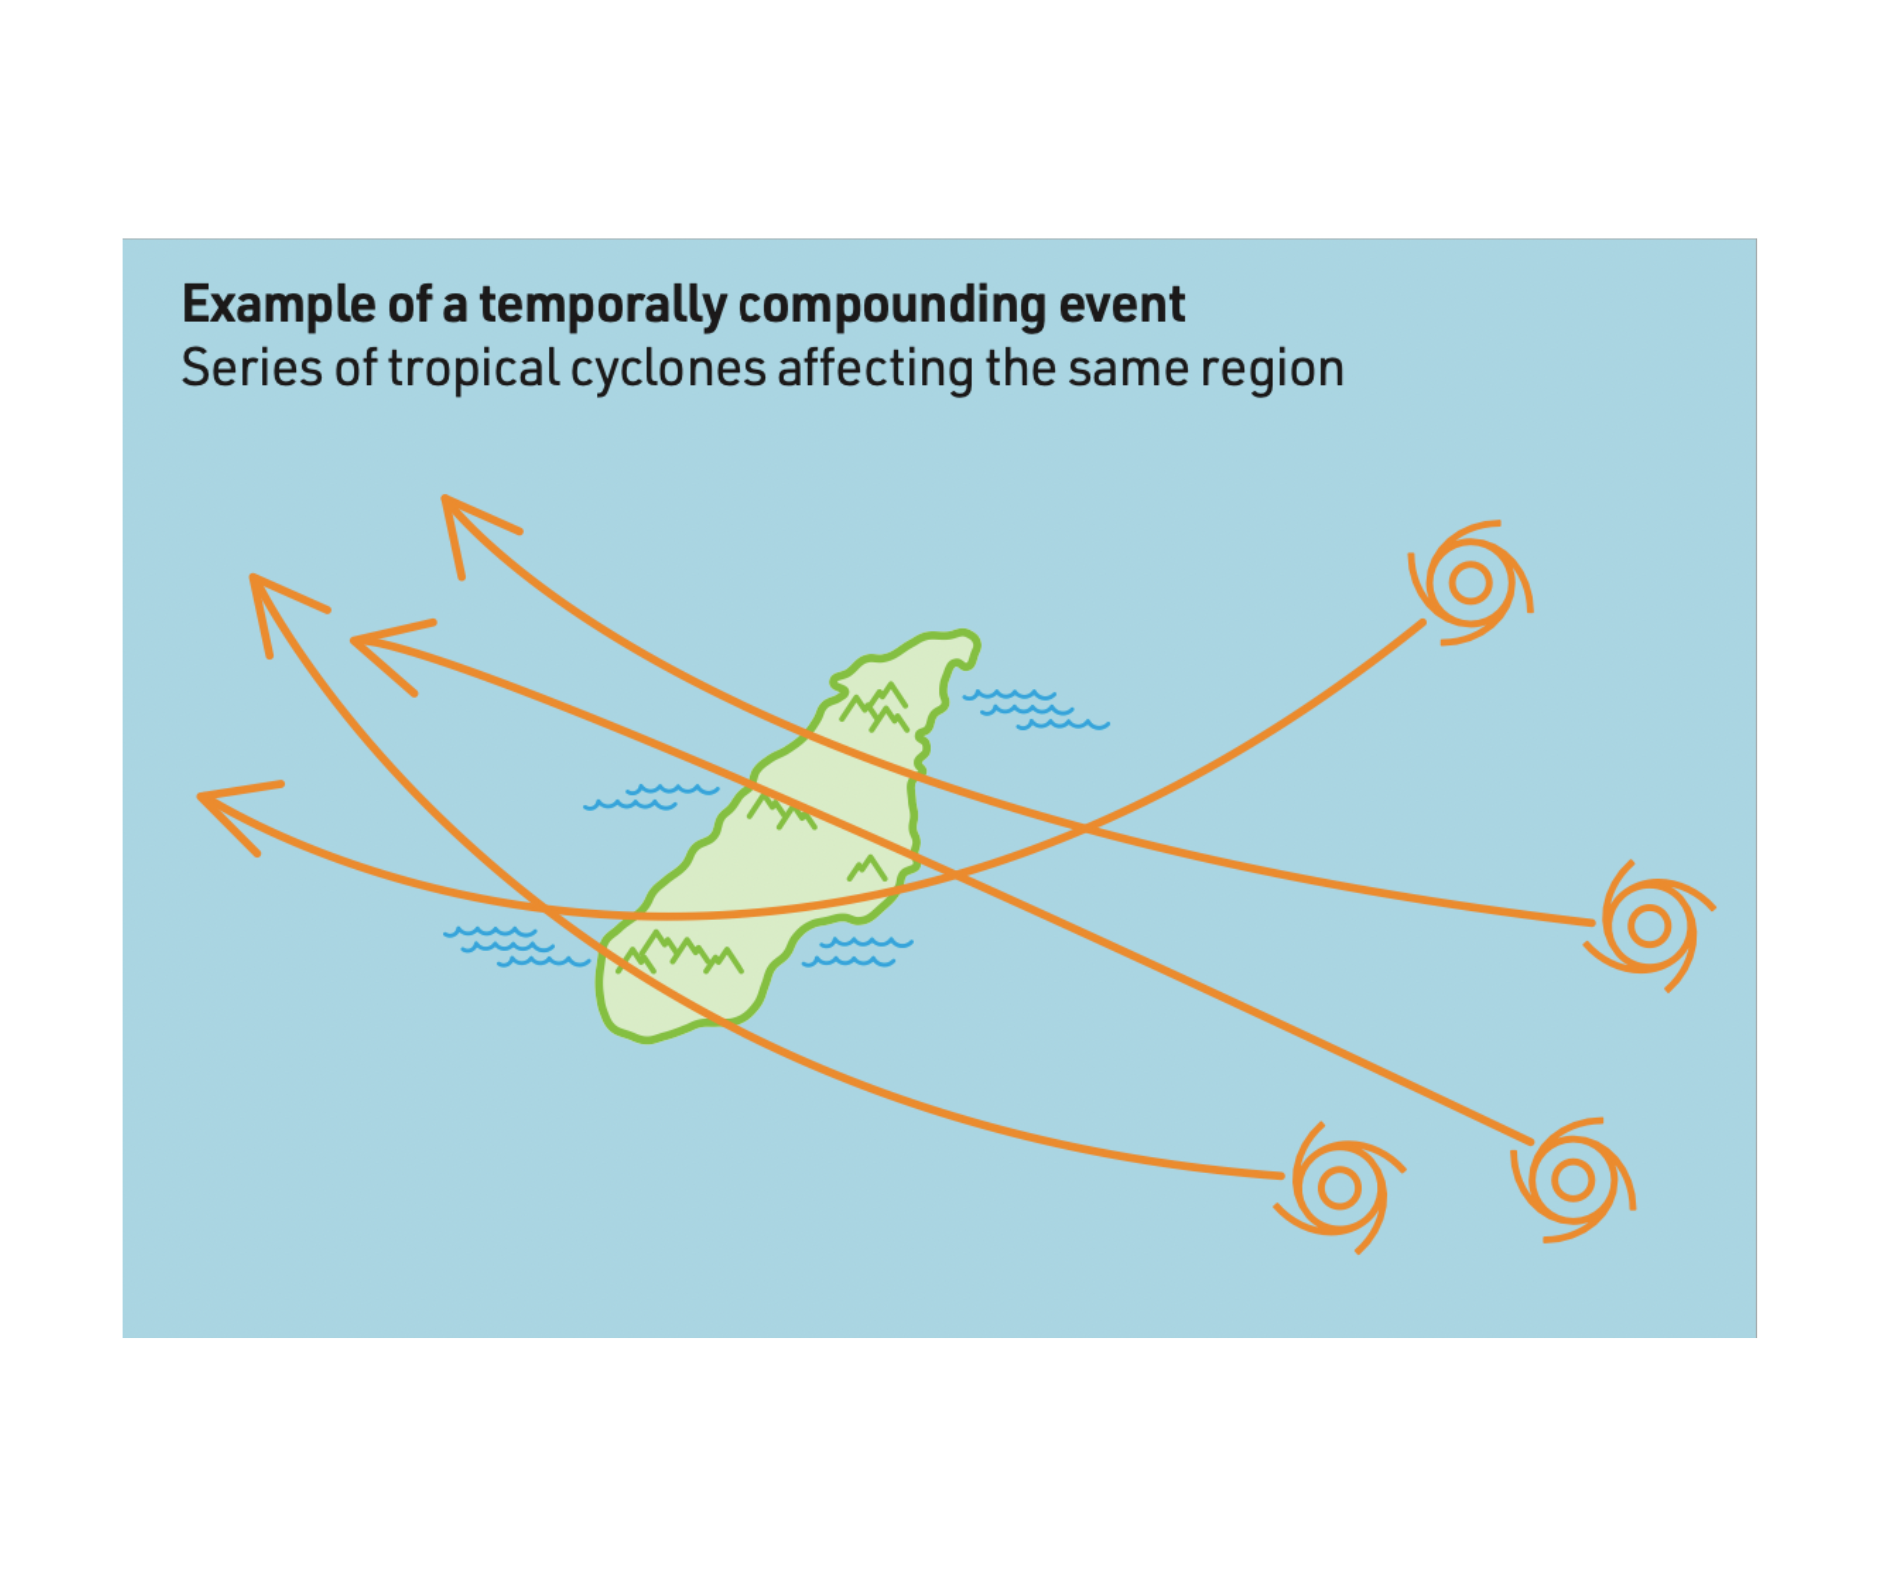 What is a temporally compounding event in weather and climate?